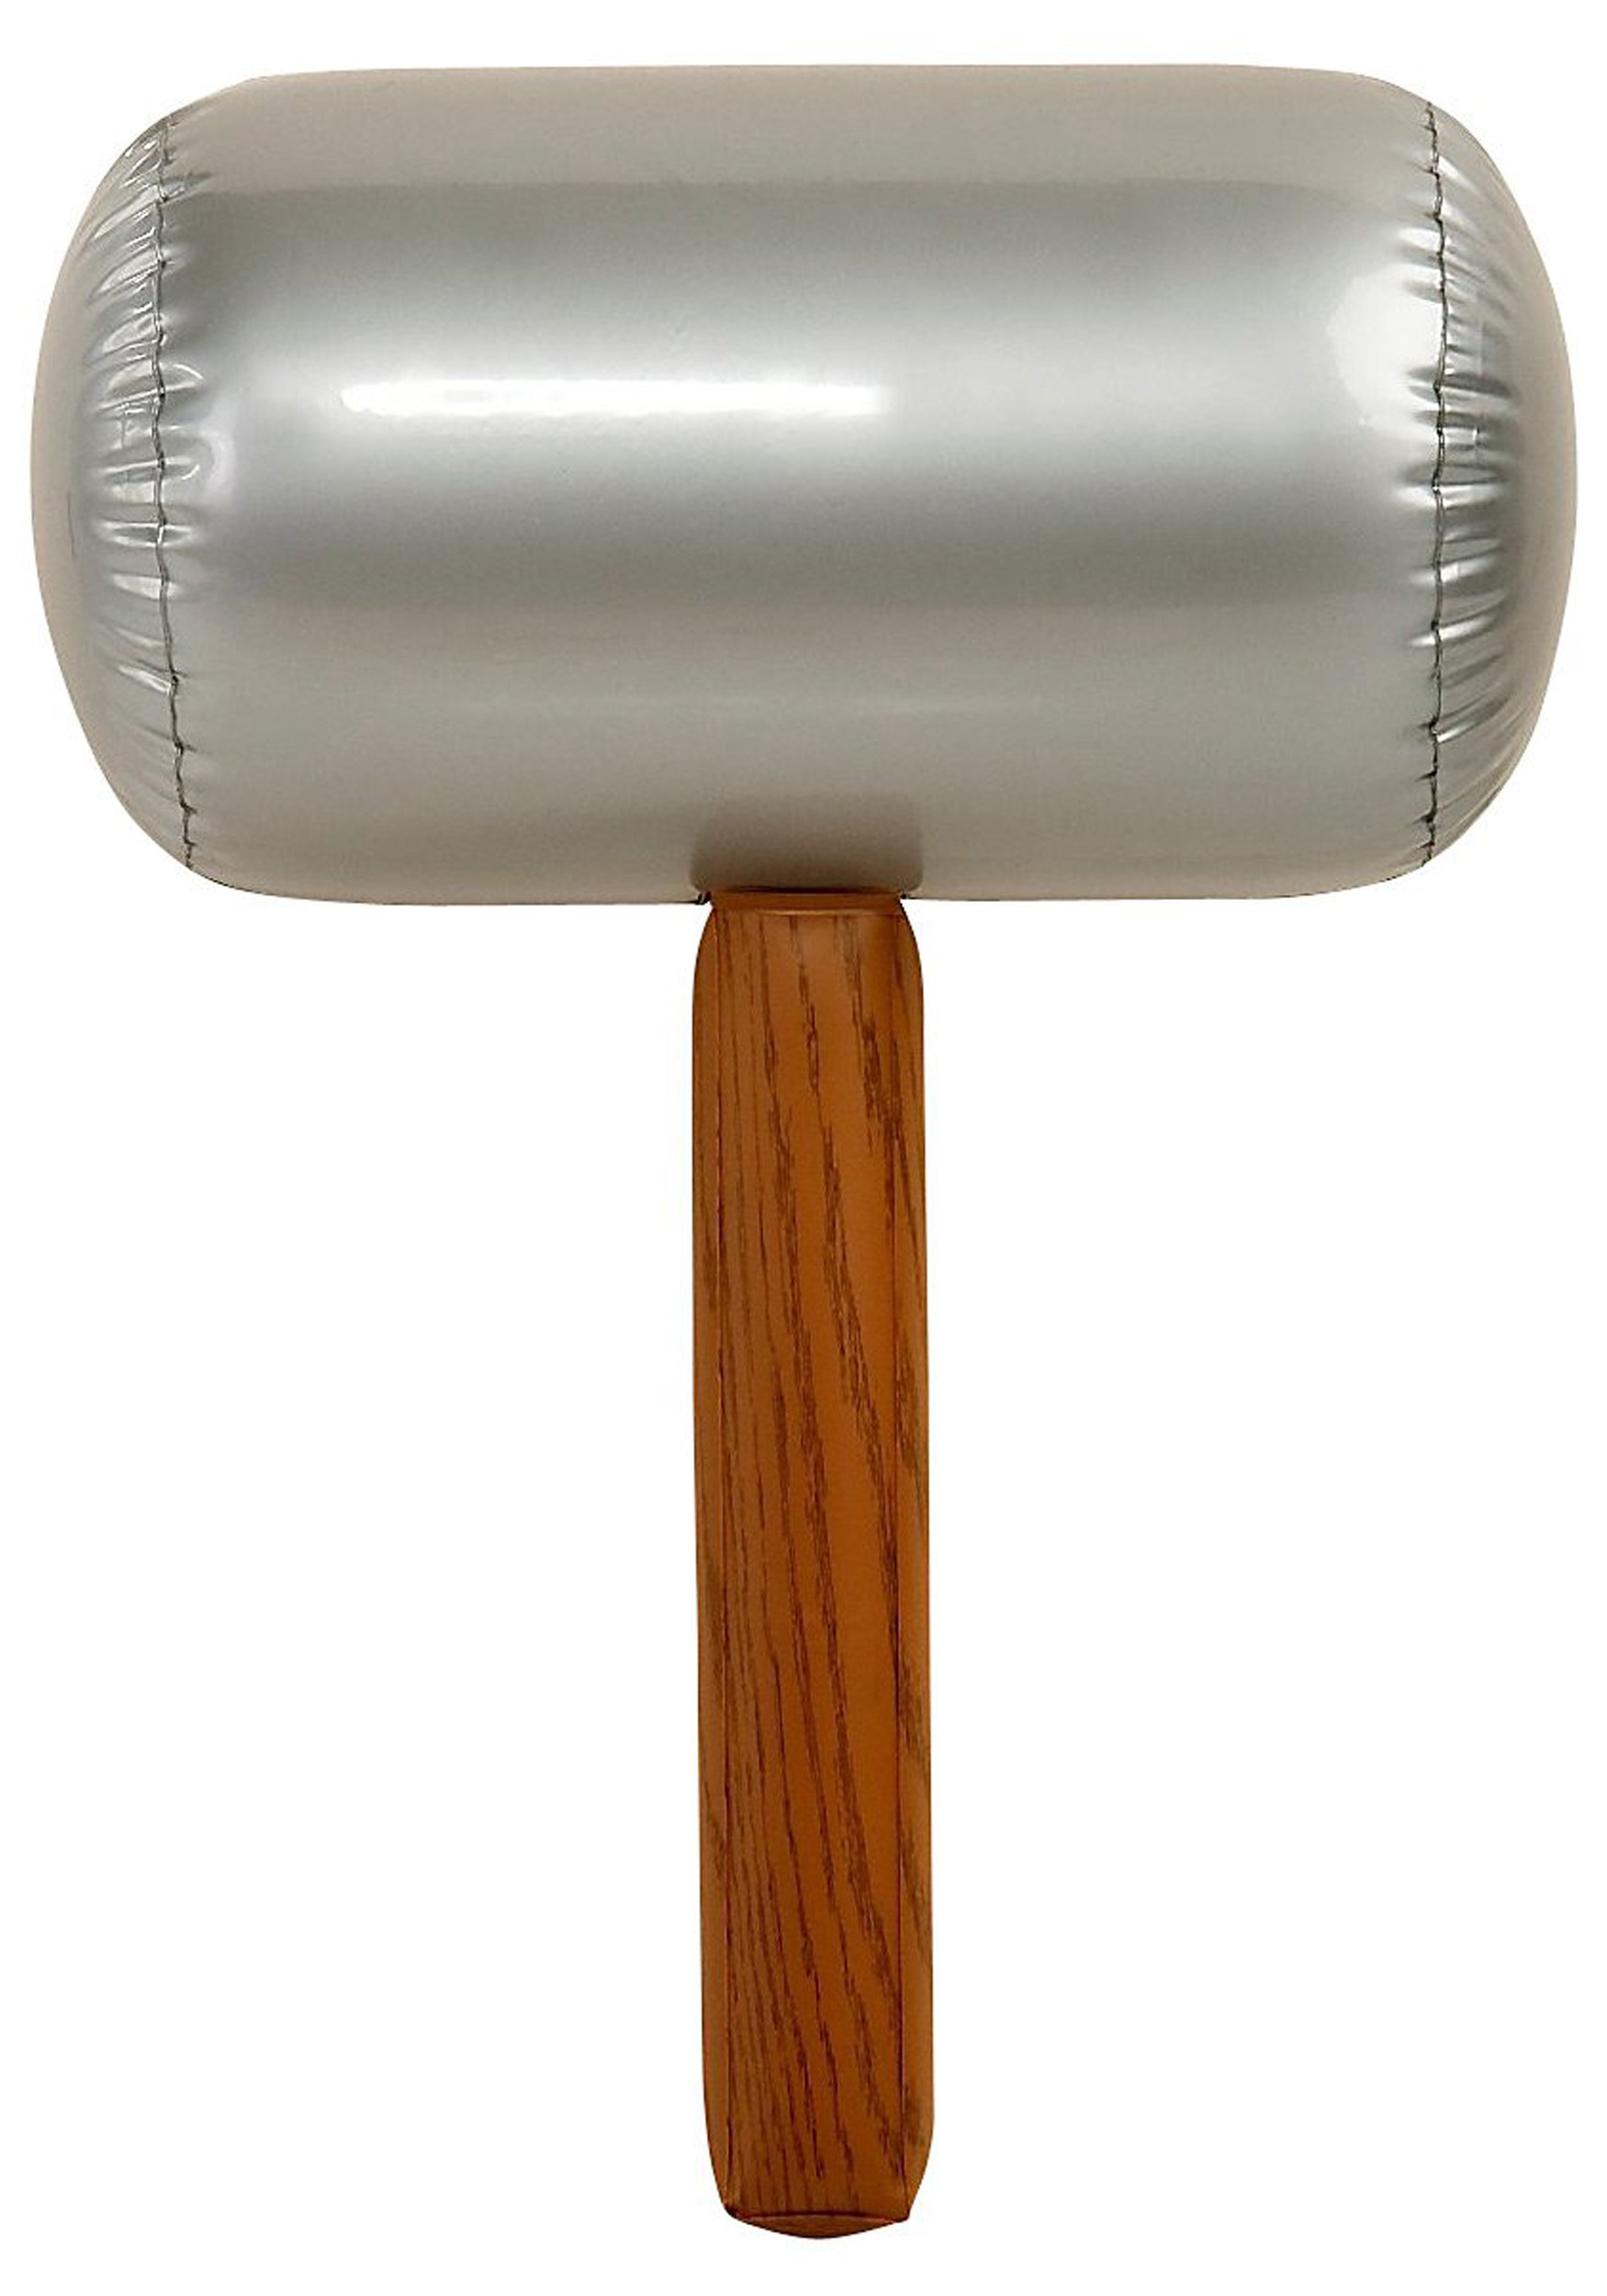 cheap inflatable hammers